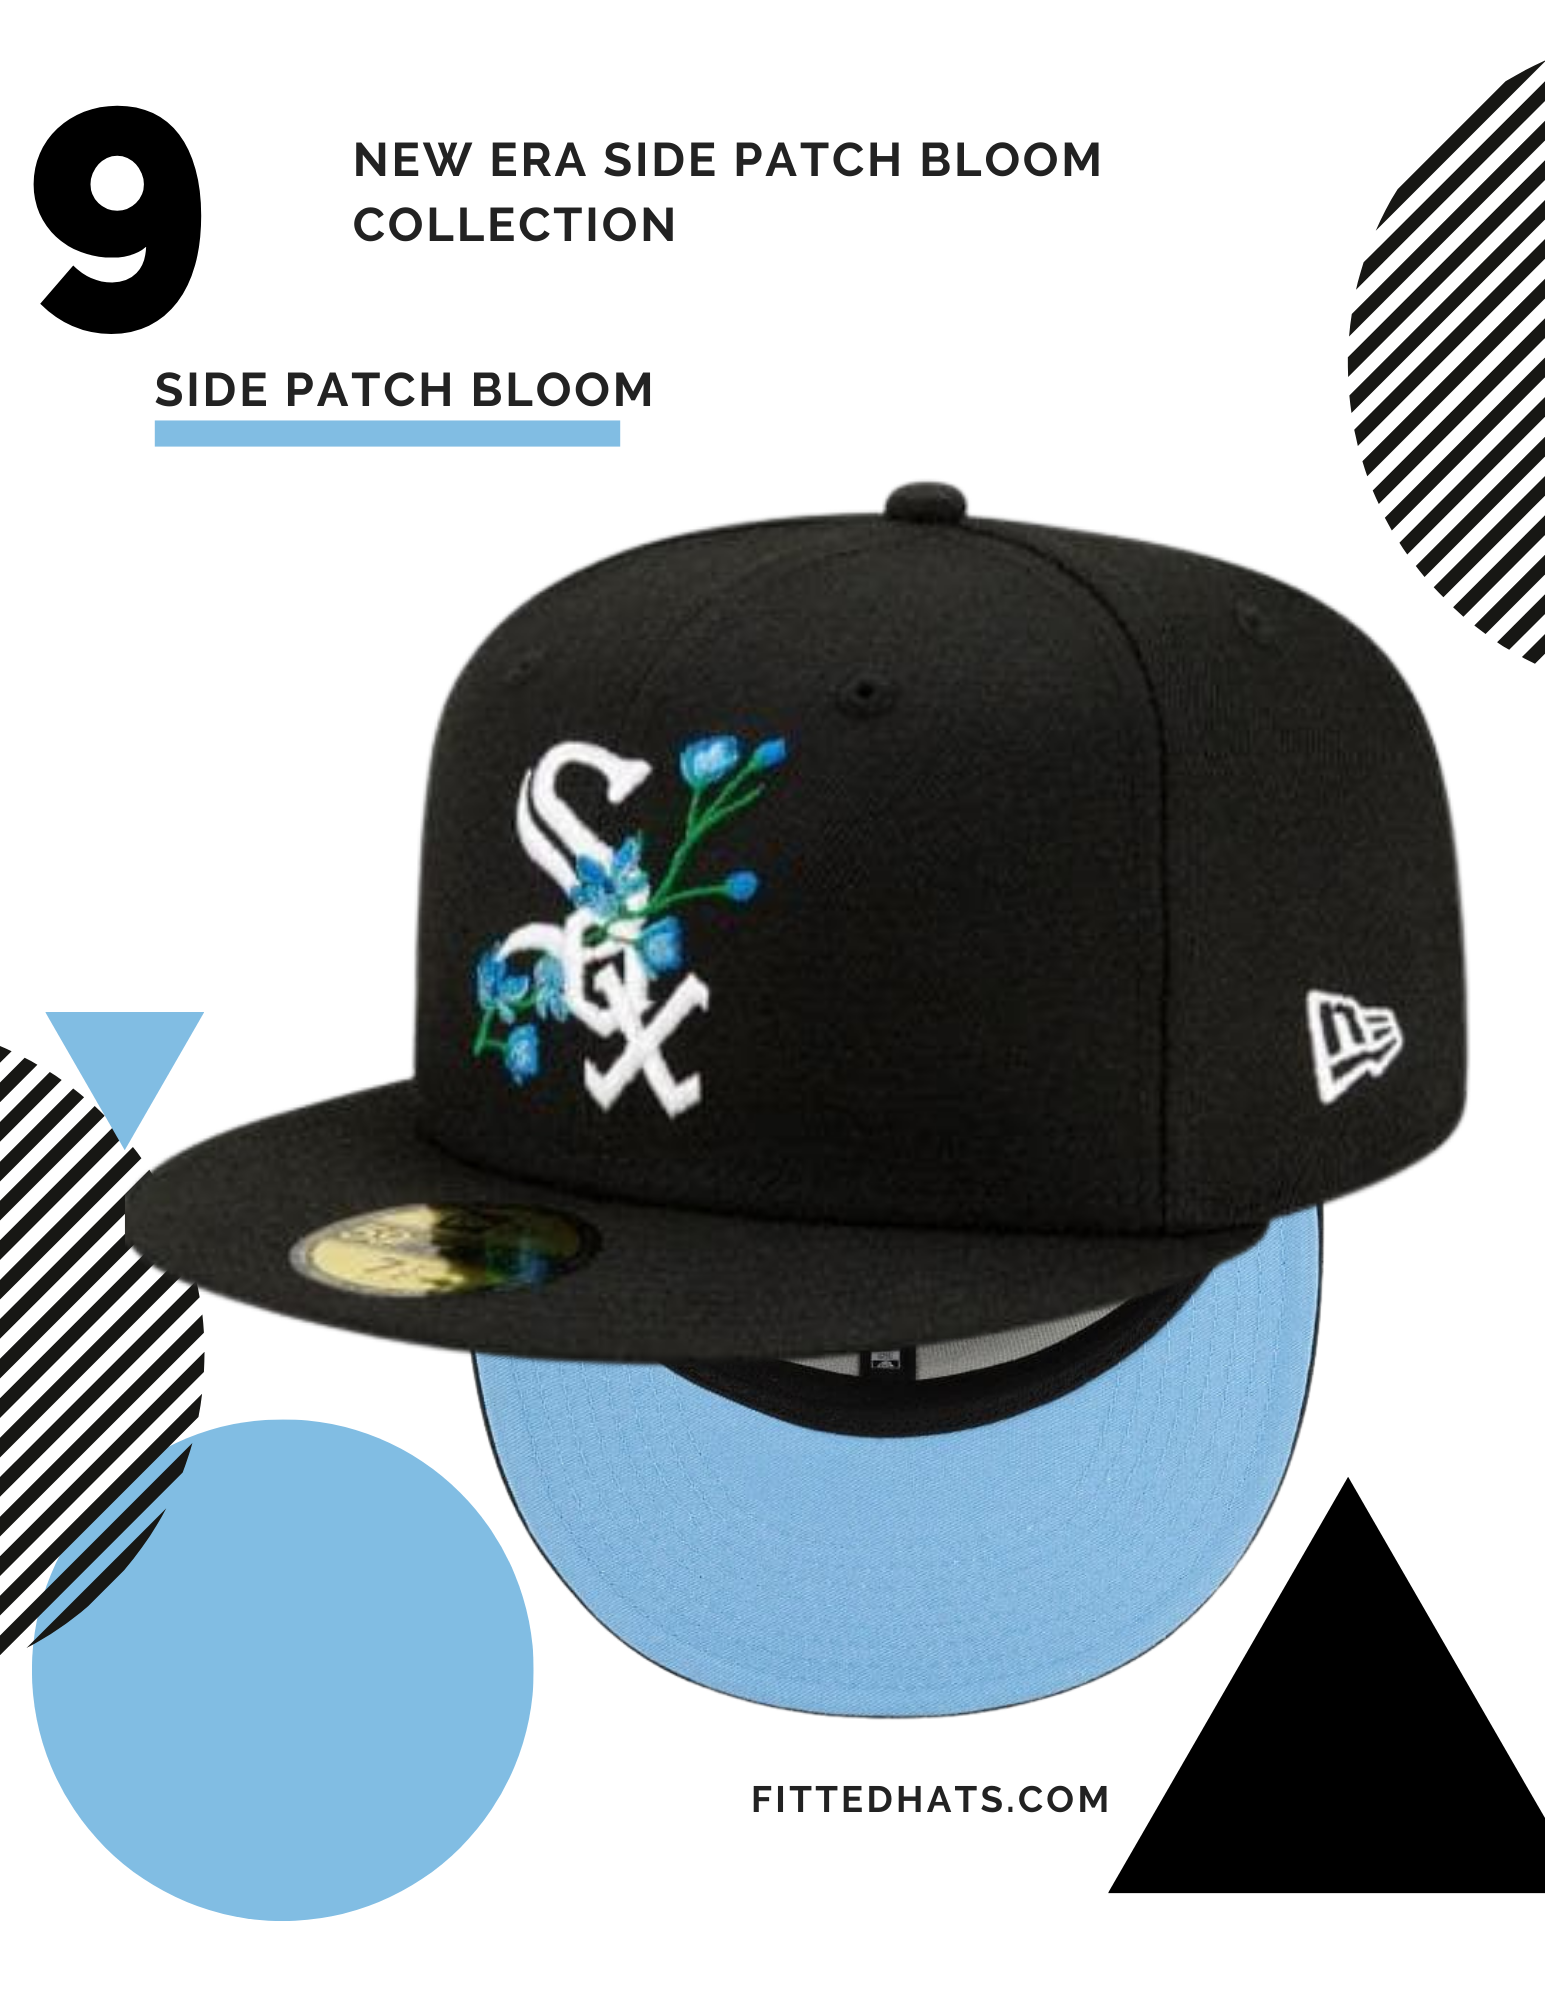 New Era Side Patch Bloom Fitted Hat Collection